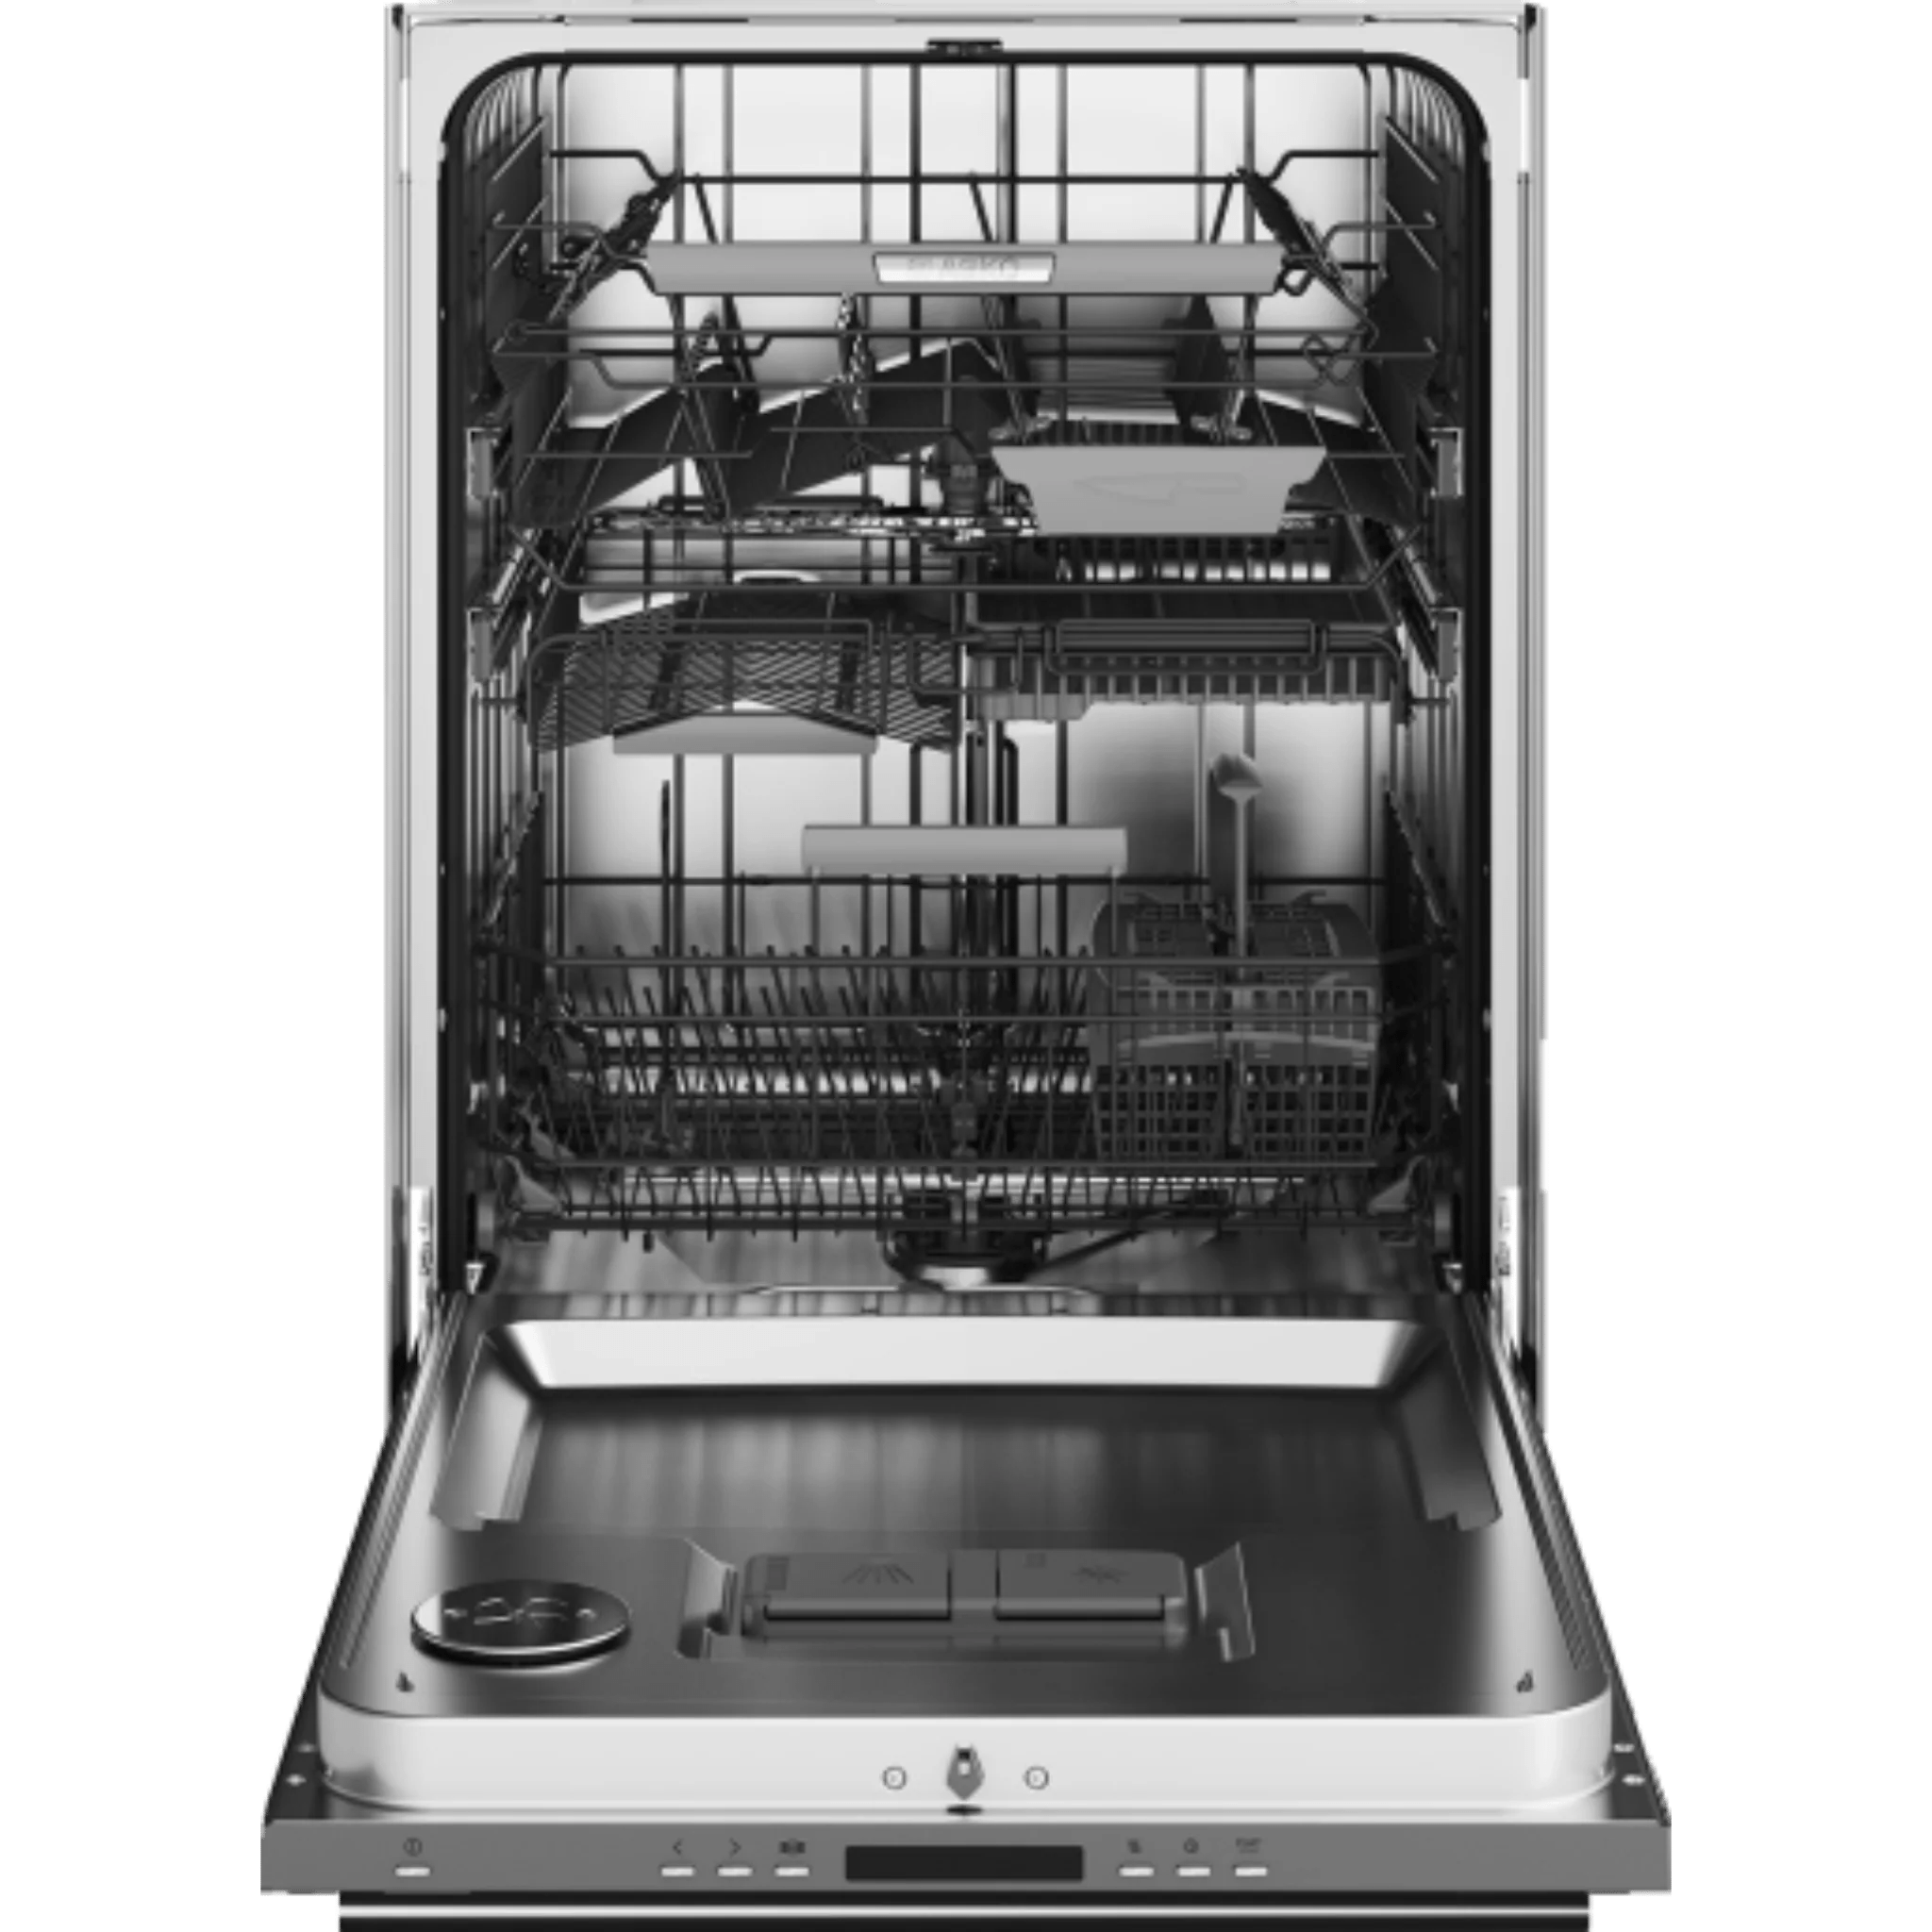 Asko 50 Series 24 Inch Wide 17 Place Setting Energy Star Rated Built-In Top Control Dishwasher with Turbo Drying and Tubular Handle Dishwashers DBI675THXXLS Luxury Appliances Direct